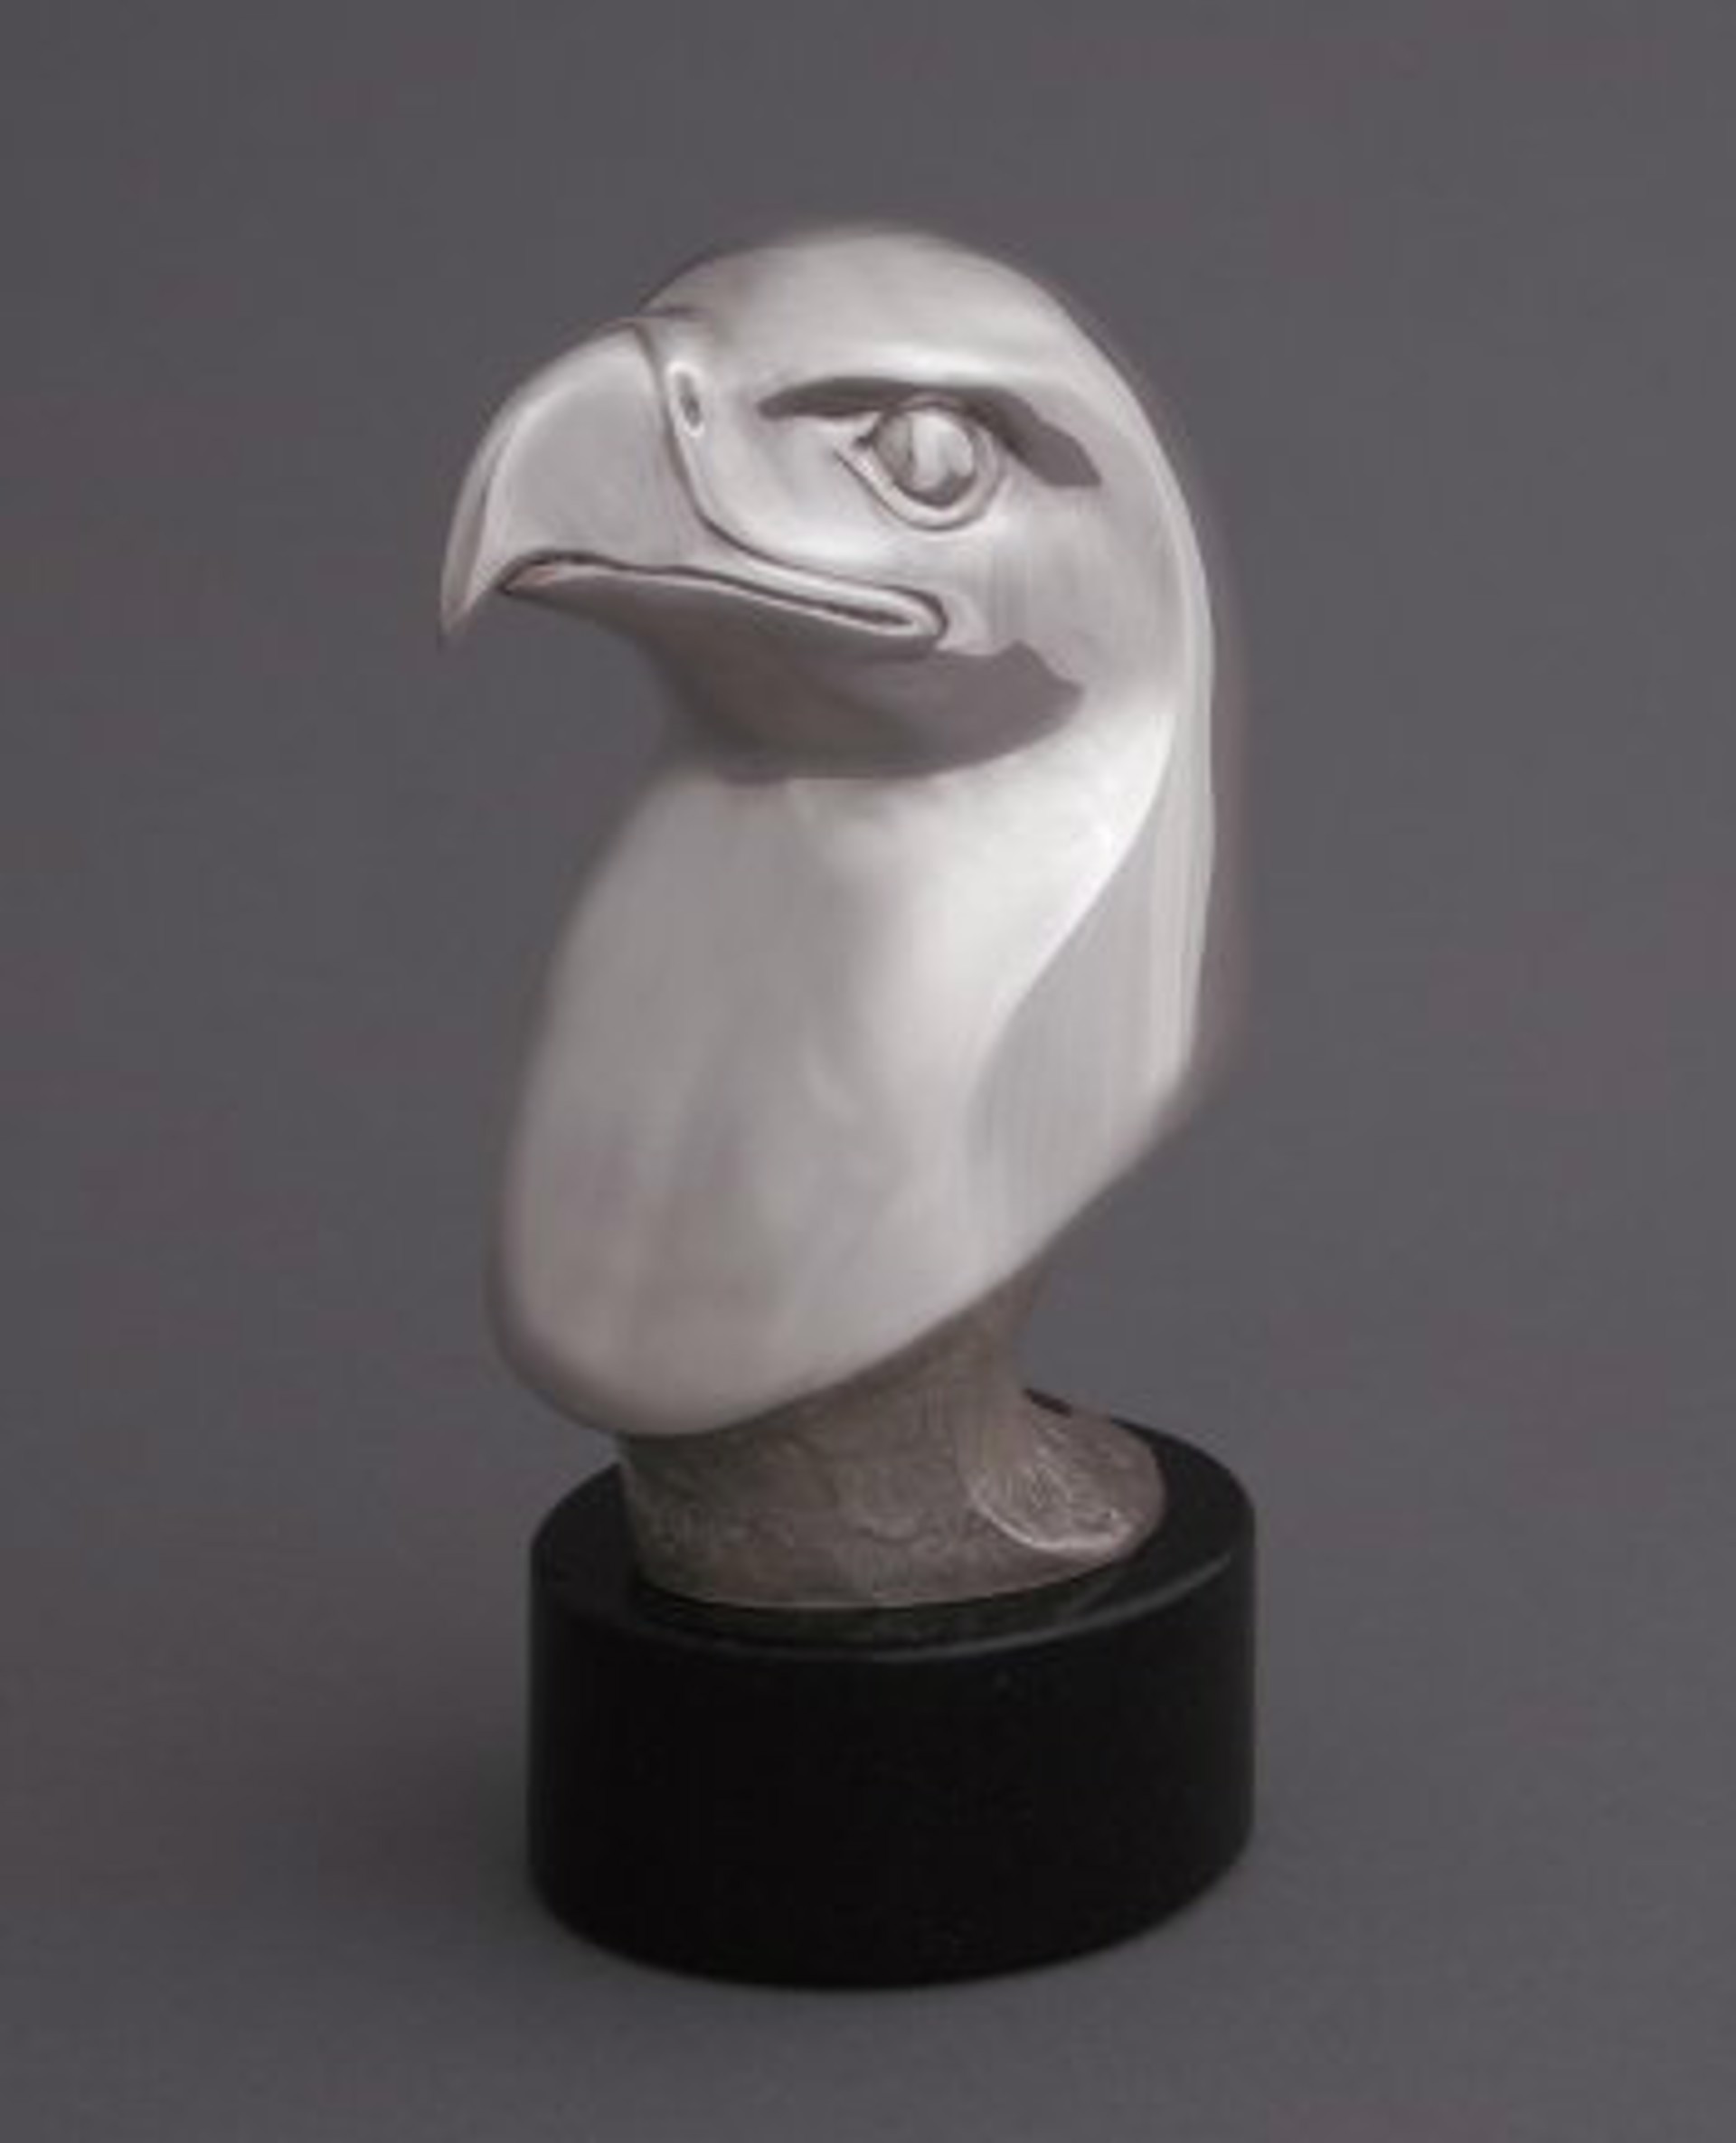 Silent Sentry (silver) by Jacques & Mary Regat